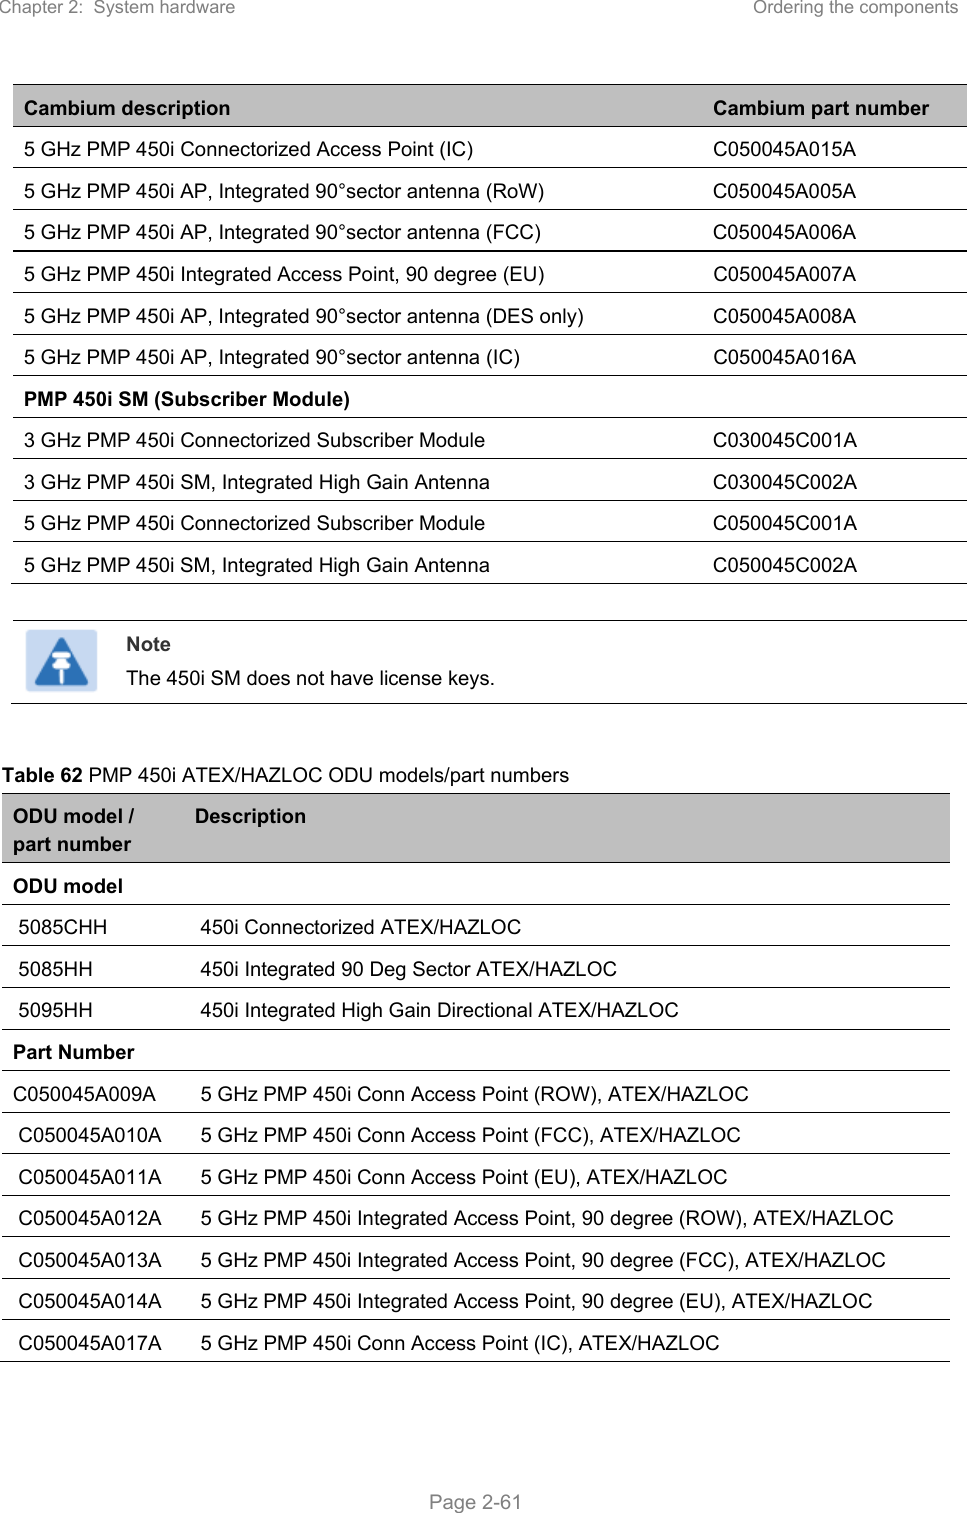 Chapter 2:  System hardware  Ordering the components   Page 2-61 Cambium description  Cambium part number 5 GHz PMP 450i Connectorized Access Point (IC)  C050045A015A 5 GHz PMP 450i AP, Integrated 90°sector antenna (RoW)  C050045A005A 5 GHz PMP 450i AP, Integrated 90°sector antenna (FCC)  C050045A006A 5 GHz PMP 450i Integrated Access Point, 90 degree (EU)  C050045A007A 5 GHz PMP 450i AP, Integrated 90°sector antenna (DES only)  C050045A008A 5 GHz PMP 450i AP, Integrated 90°sector antenna (IC)  C050045A016A PMP 450i SM (Subscriber Module)   3 GHz PMP 450i Connectorized Subscriber Module  C030045C001A 3 GHz PMP 450i SM, Integrated High Gain Antenna  C030045C002A 5 GHz PMP 450i Connectorized Subscriber Module  C050045C001A 5 GHz PMP 450i SM, Integrated High Gain Antenna  C050045C002A   Note The 450i SM does not have license keys.  Table 62 PMP 450i ATEX/HAZLOC ODU models/part numbers ODU model / part number Description ODU model    5085CHH    450i Connectorized ATEX/HAZLOC   5085HH    450i Integrated 90 Deg Sector ATEX/HAZLOC   5095HH    450i Integrated High Gain Directional ATEX/HAZLOC  Part Number   C050045A009A    5 GHz PMP 450i Conn Access Point (ROW), ATEX/HAZLOC   C050045A010A    5 GHz PMP 450i Conn Access Point (FCC), ATEX/HAZLOC   C050045A011A    5 GHz PMP 450i Conn Access Point (EU), ATEX/HAZLOC   C050045A012A    5 GHz PMP 450i Integrated Access Point, 90 degree (ROW), ATEX/HAZLOC   C050045A013A    5 GHz PMP 450i Integrated Access Point, 90 degree (FCC), ATEX/HAZLOC   C050045A014A    5 GHz PMP 450i Integrated Access Point, 90 degree (EU), ATEX/HAZLOC   C050045A017A    5 GHz PMP 450i Conn Access Point (IC), ATEX/HAZLOC  